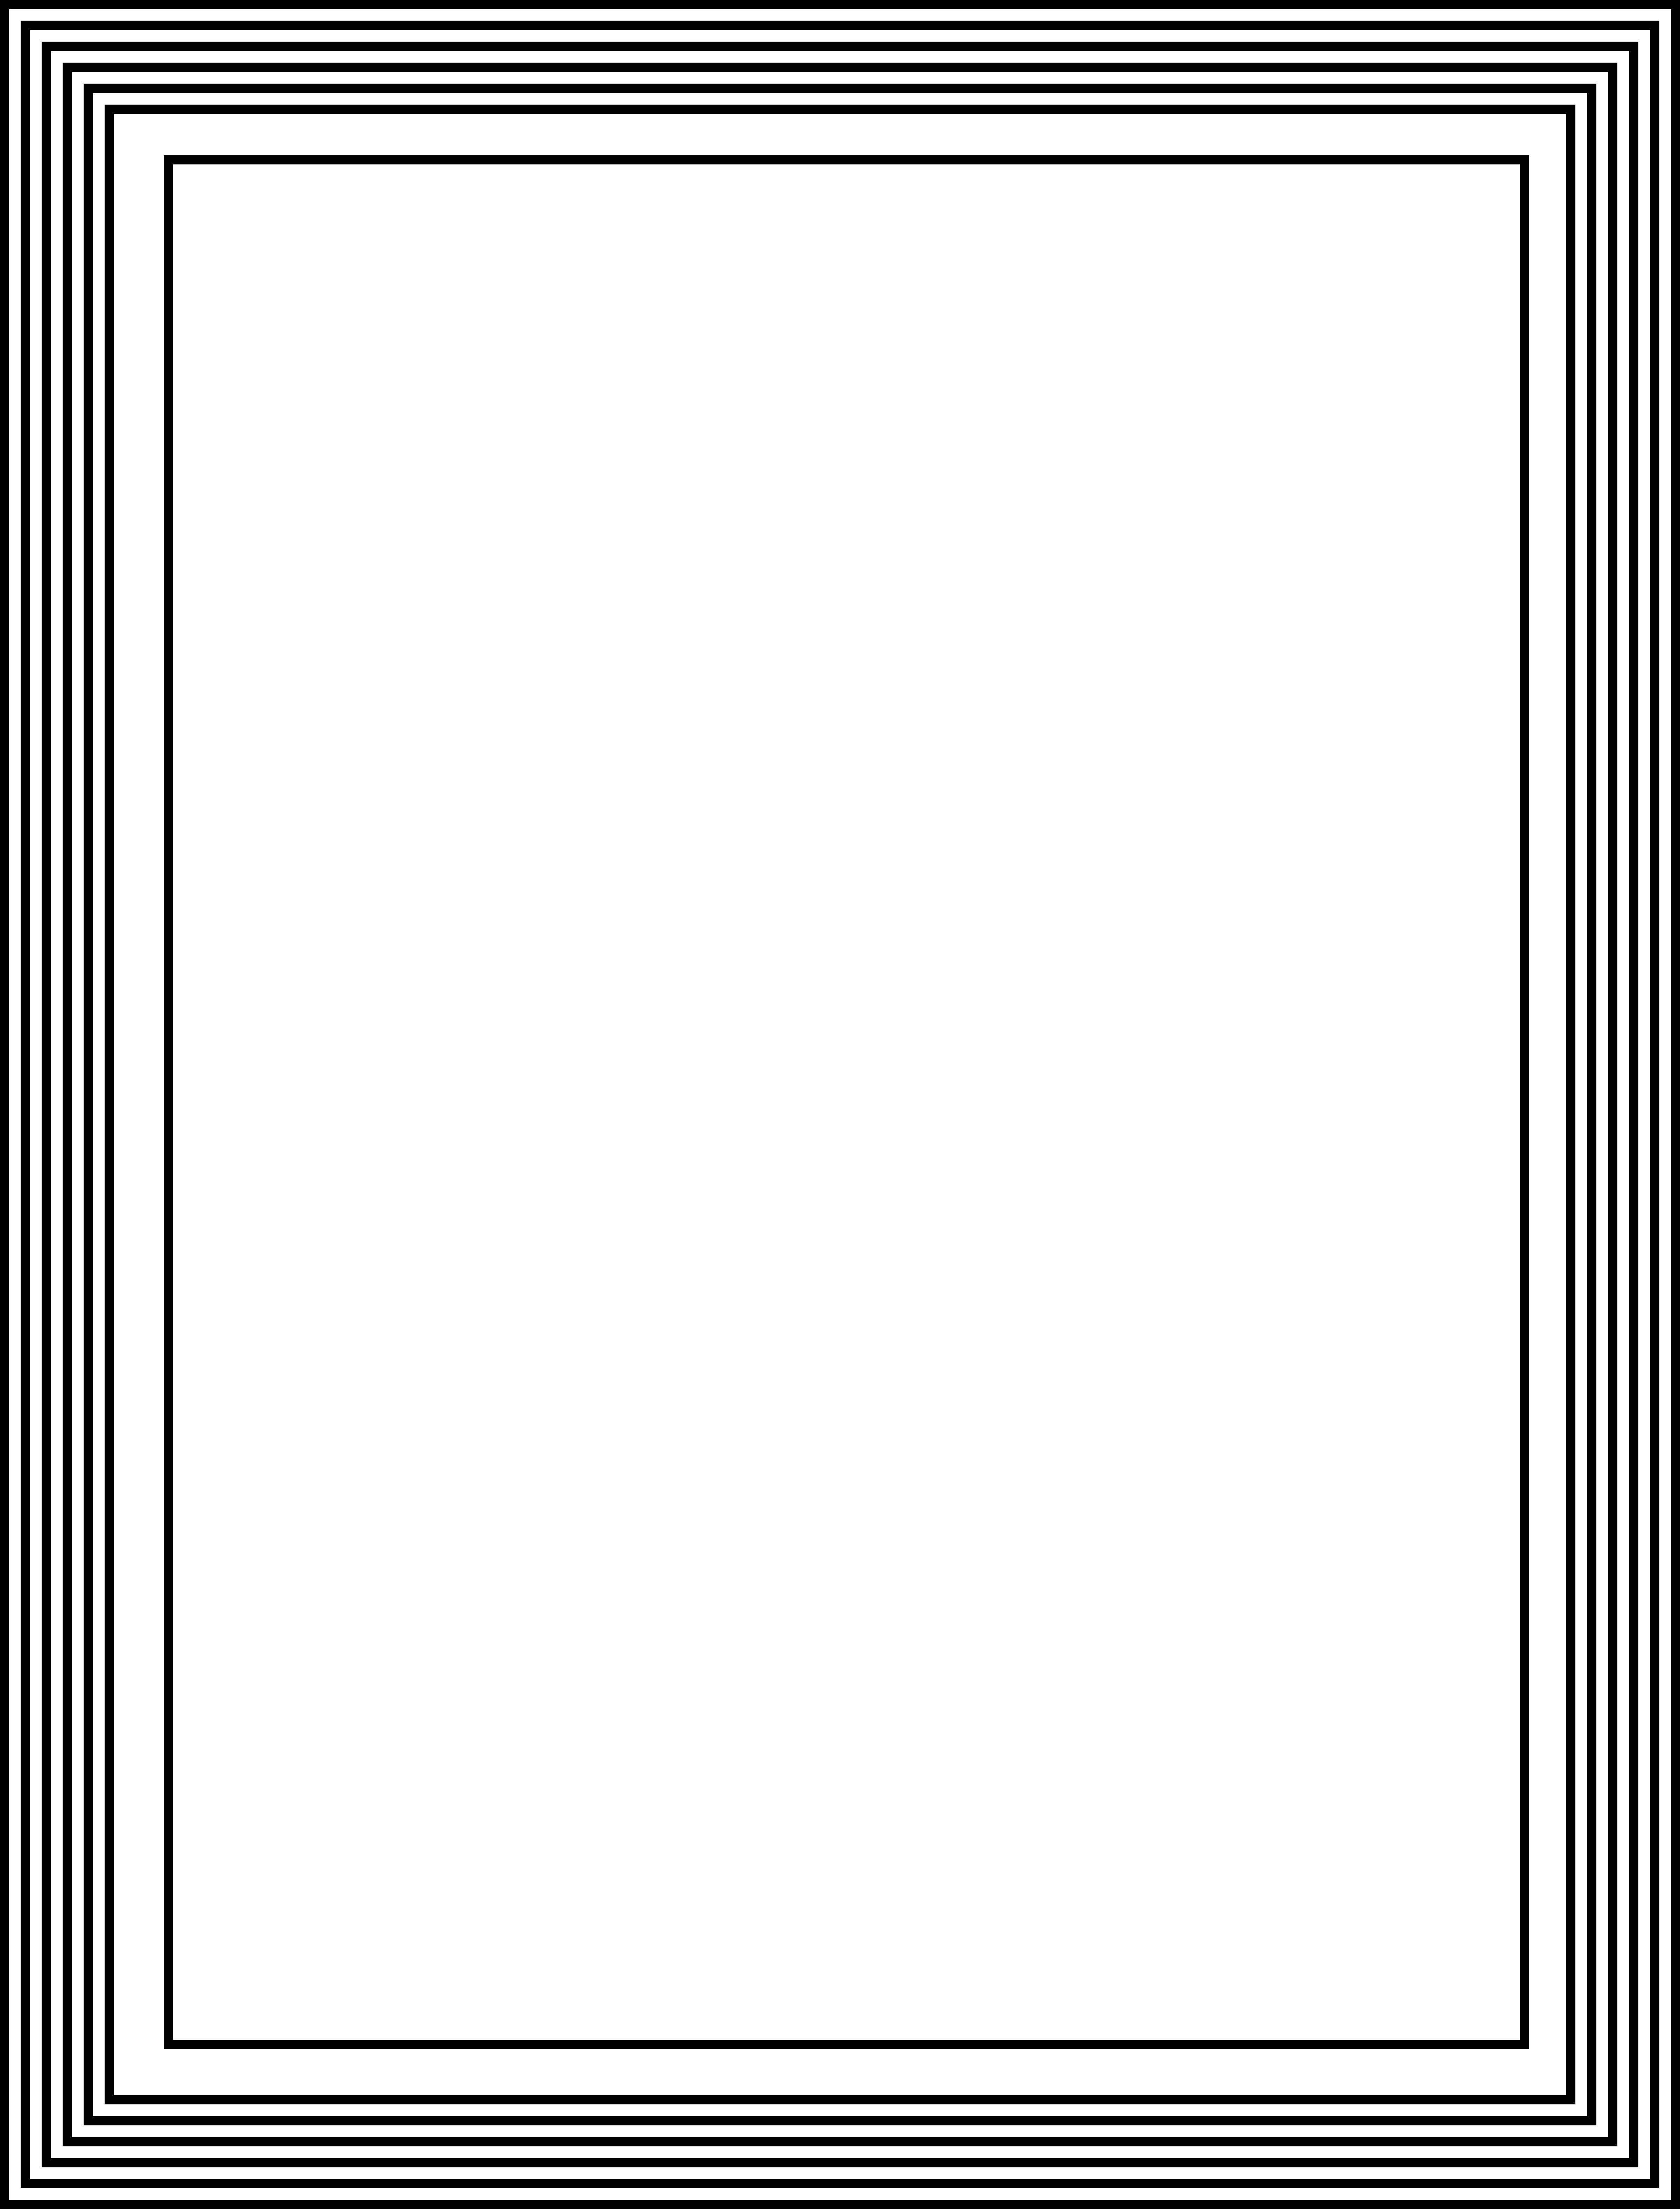 Ten Versatile Black and White Borders for Any DTP Project